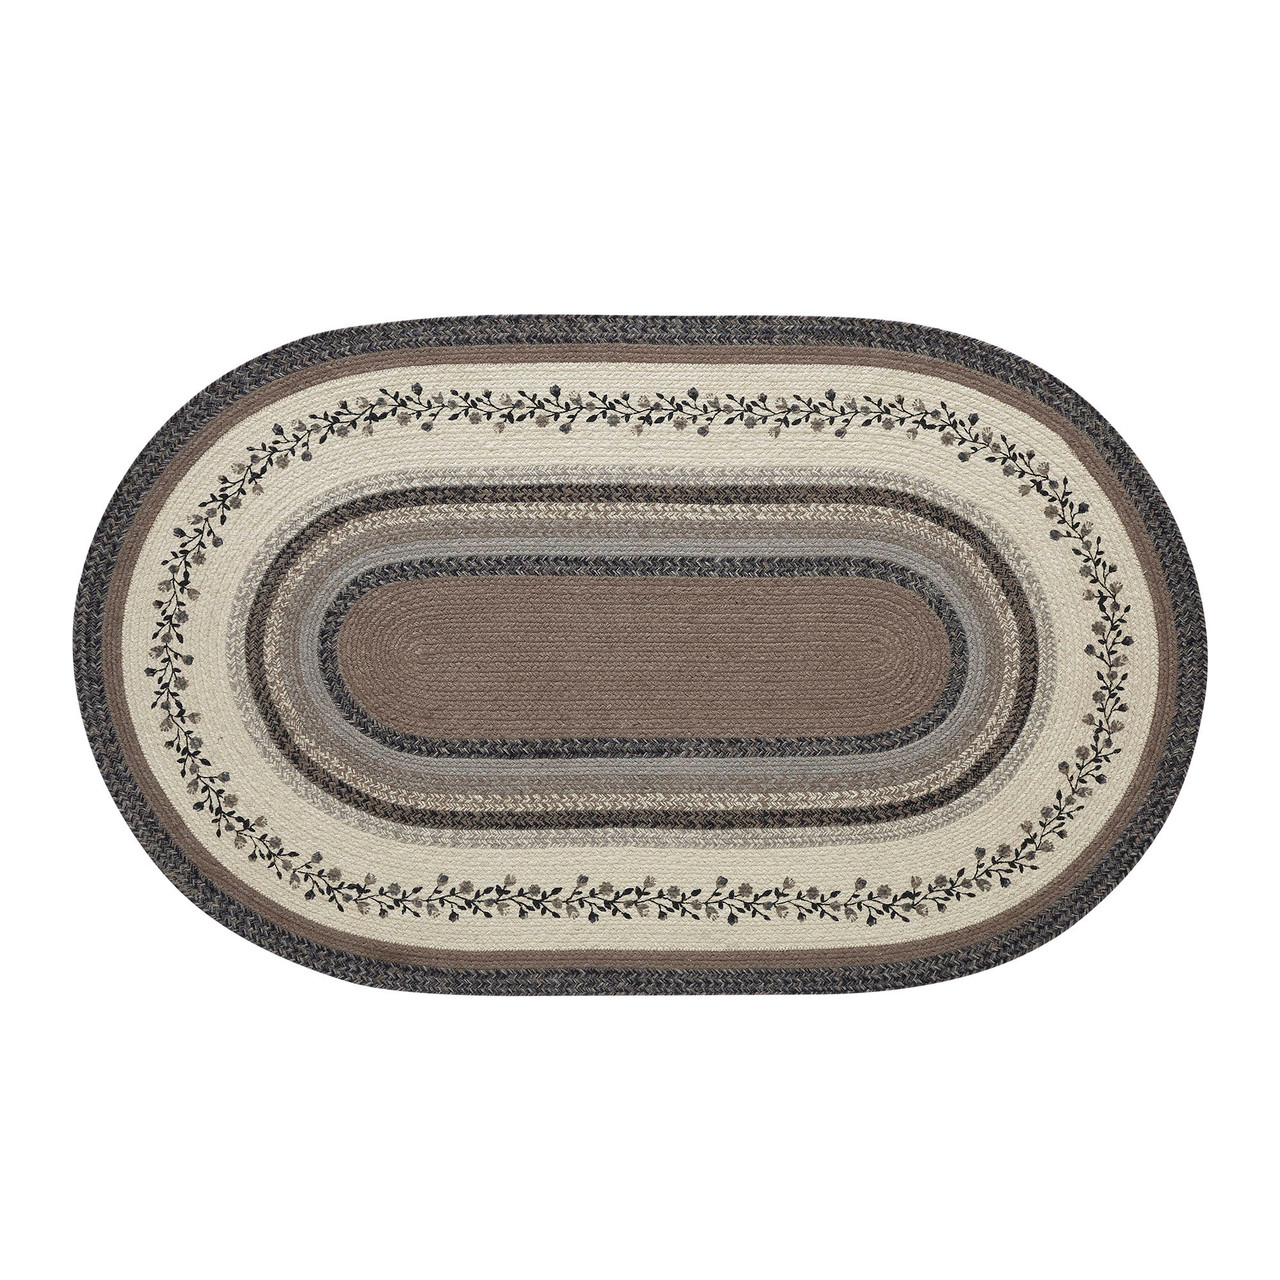 Vining Florals Braided Oval Rug with Included Rug Pad